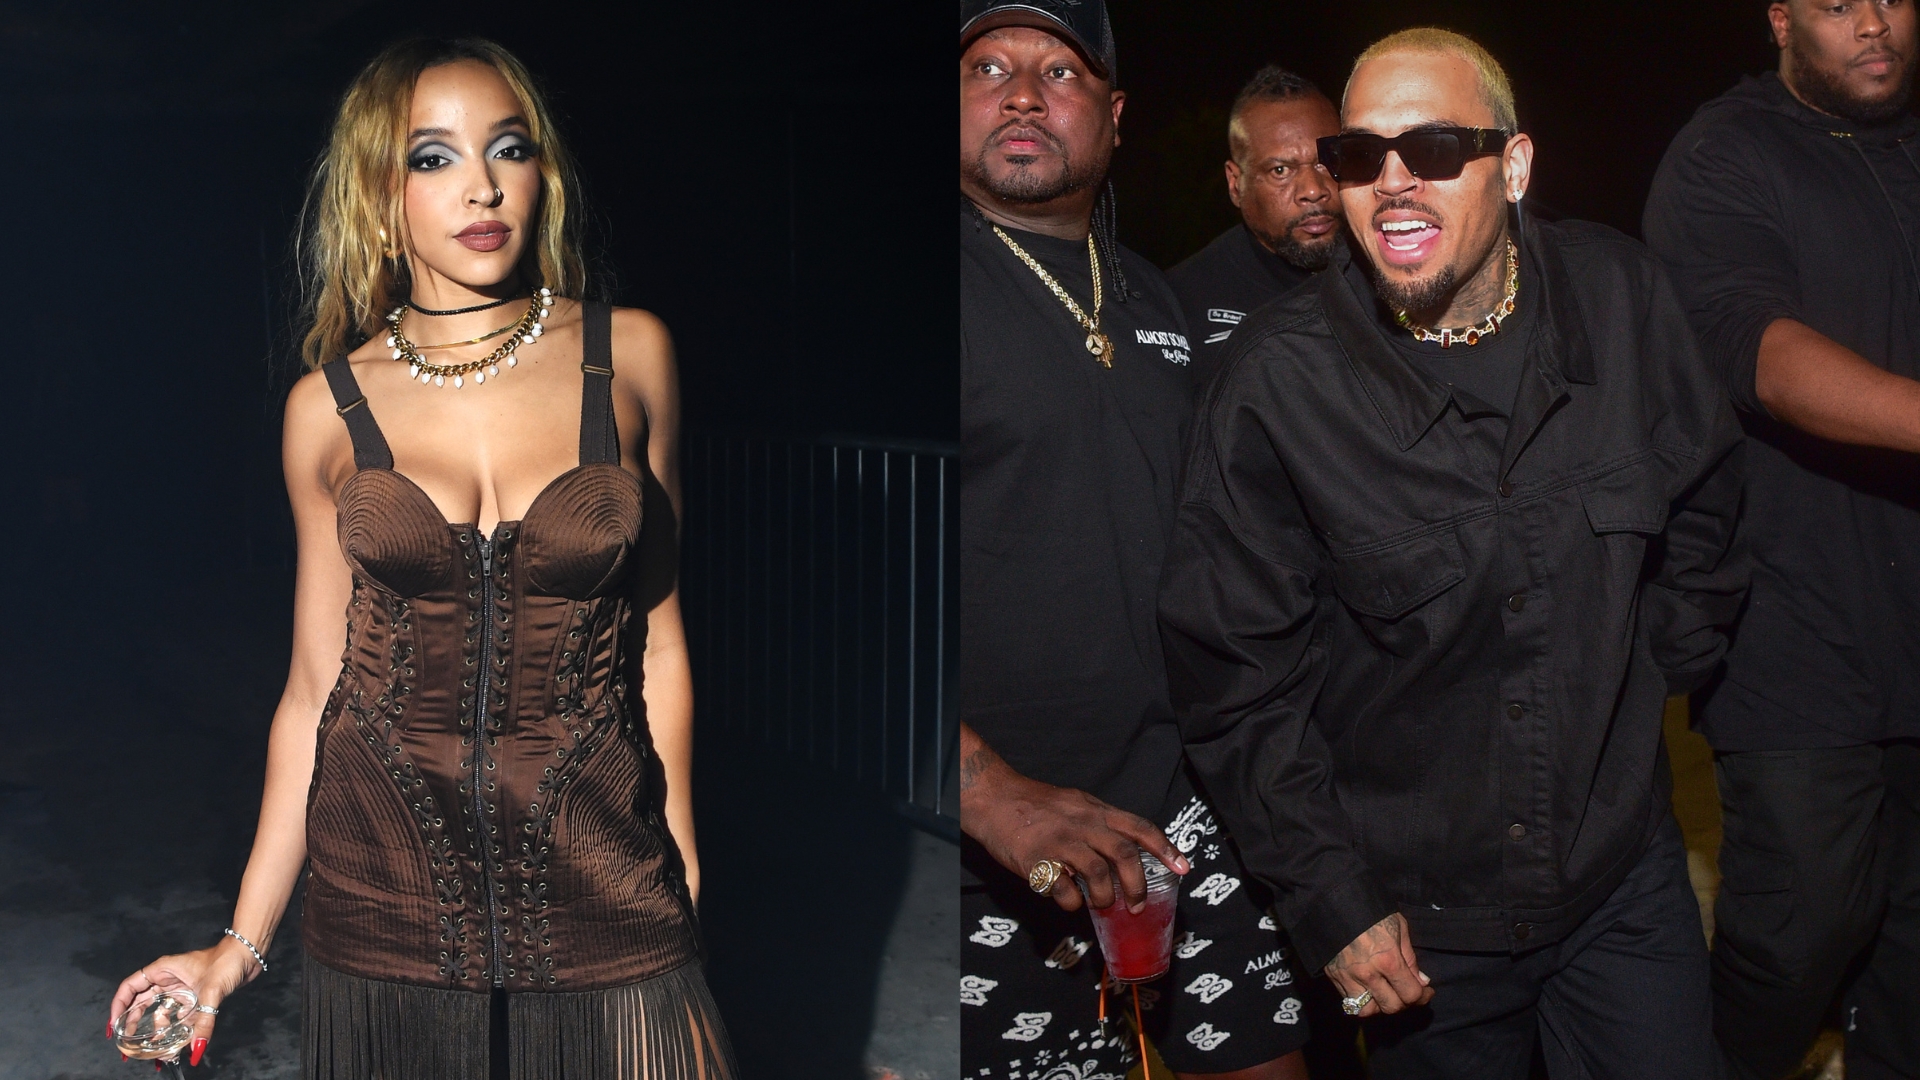 Tinashe Continues Chris Brown Beef By Liking Tweet Suggesting He’s “Butthurt”